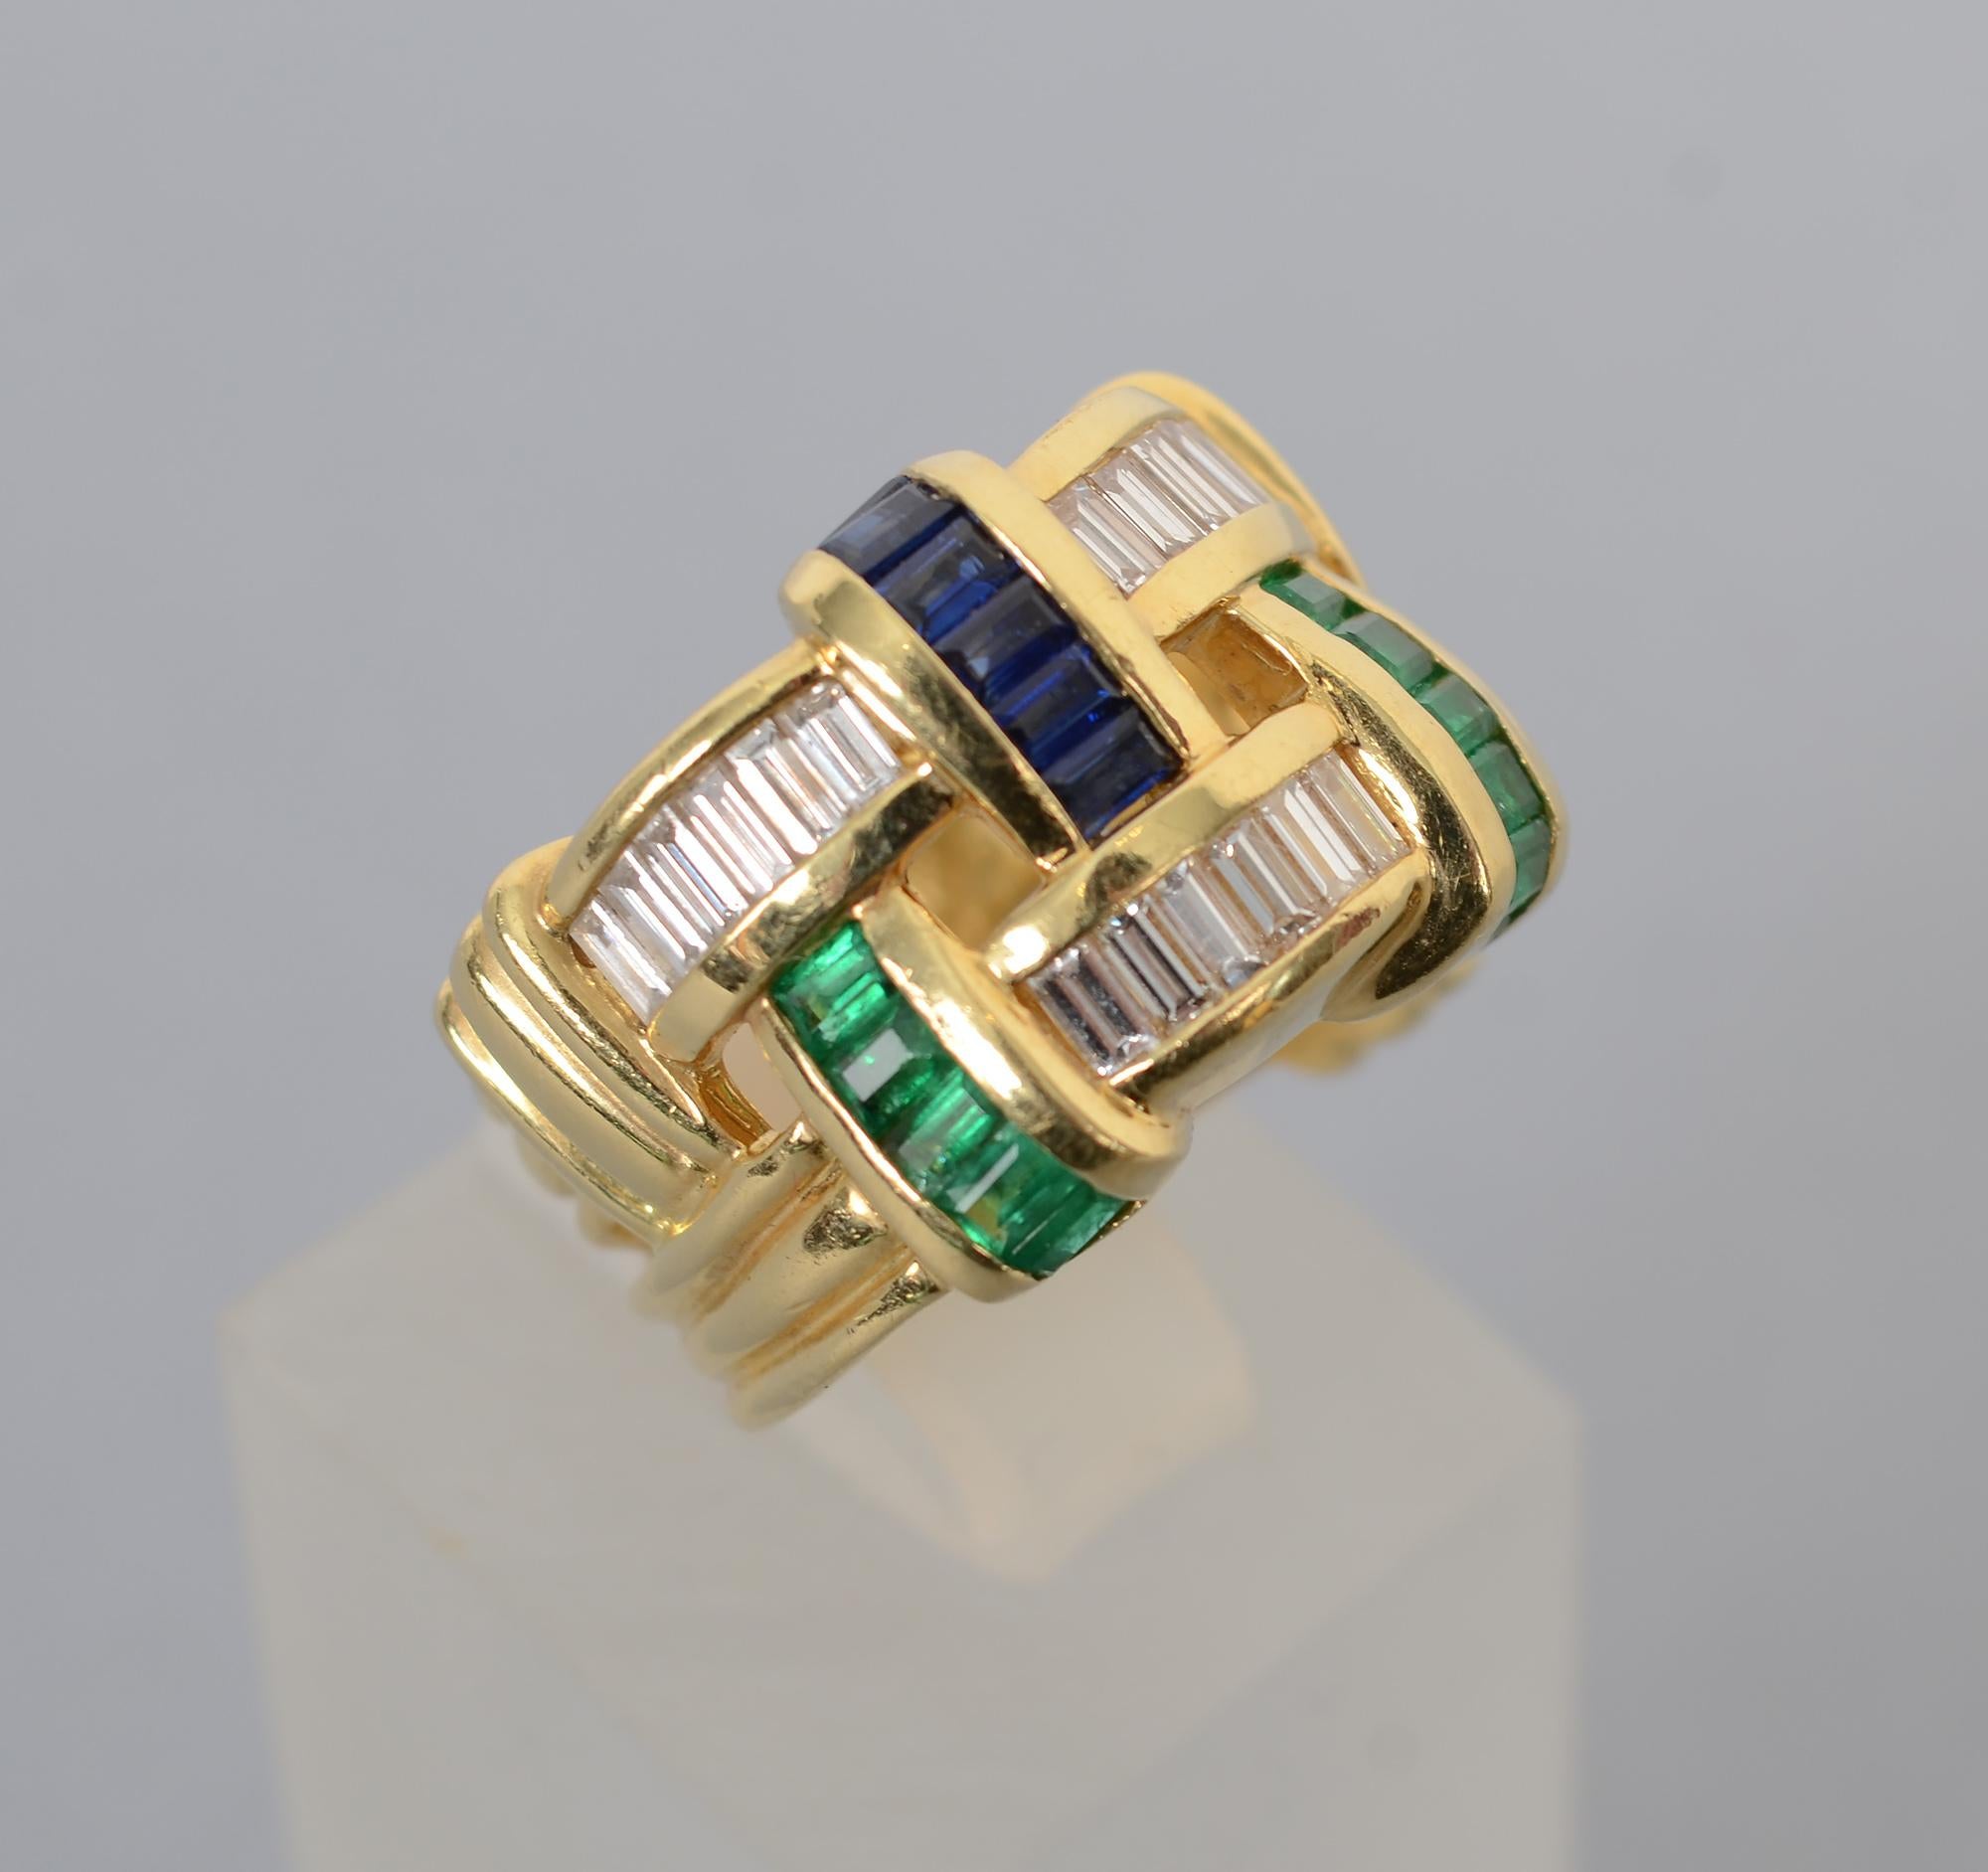 Charles Krypell wide band ring of diamonds; sapphires and emeralds. Krypell is well known for the fine quality of the stones he used.  The baguette stones are set in a design to appear as though they are interwoven.
The ring measures 5/8